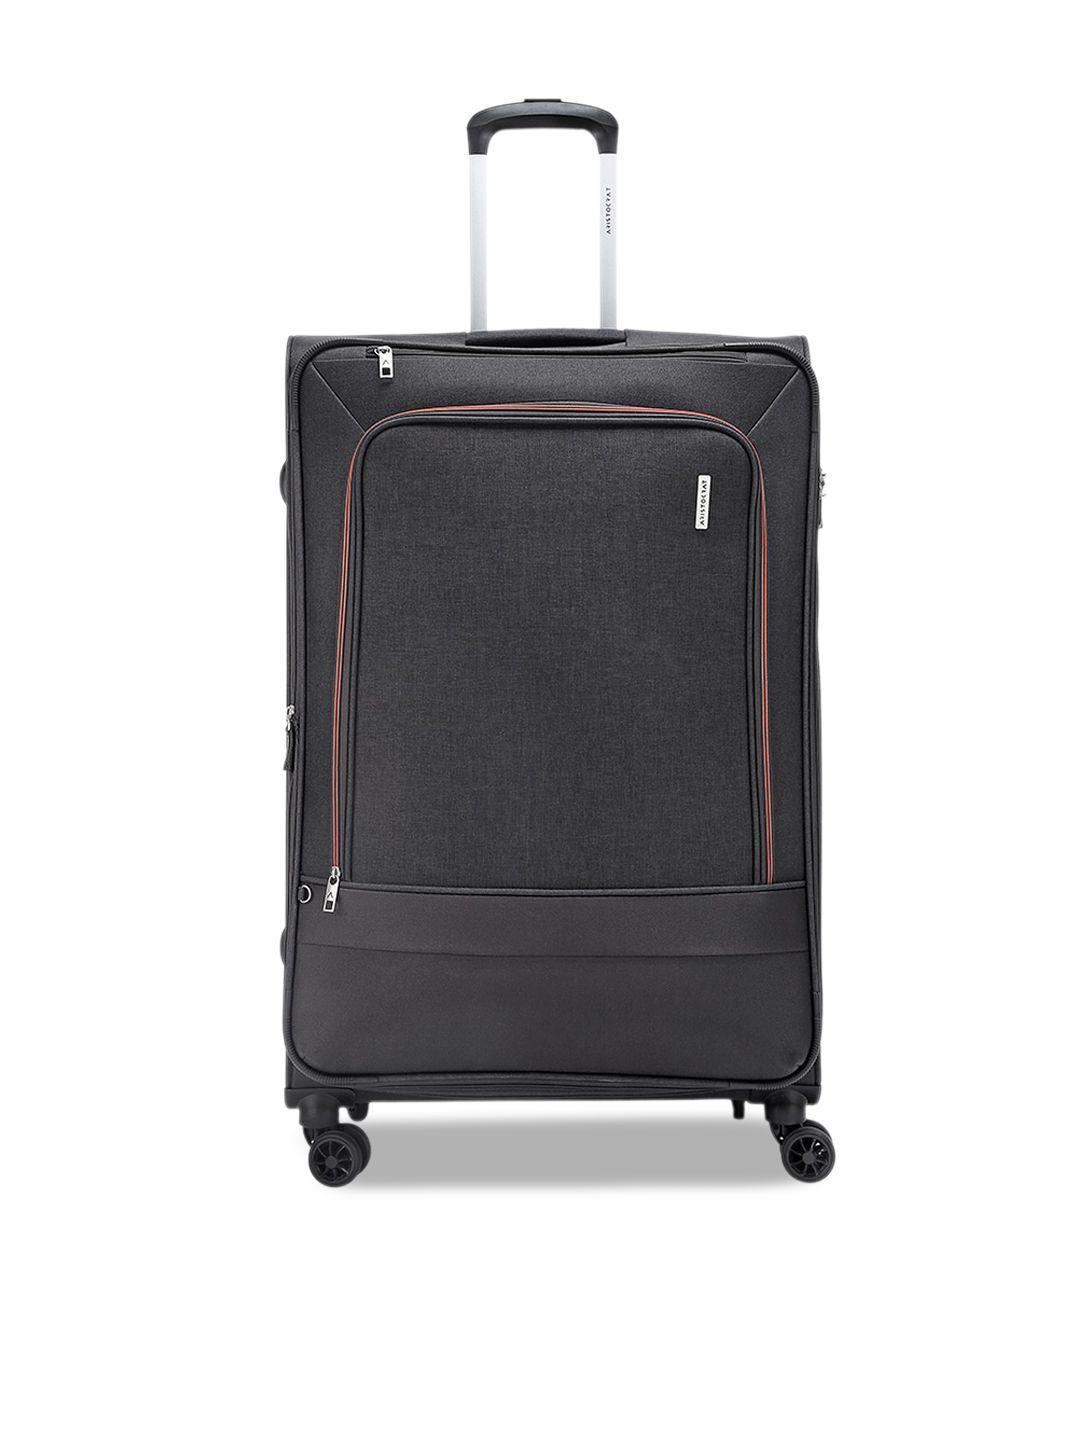 aristocrat soft sidded cabin trolley trolley suitcase